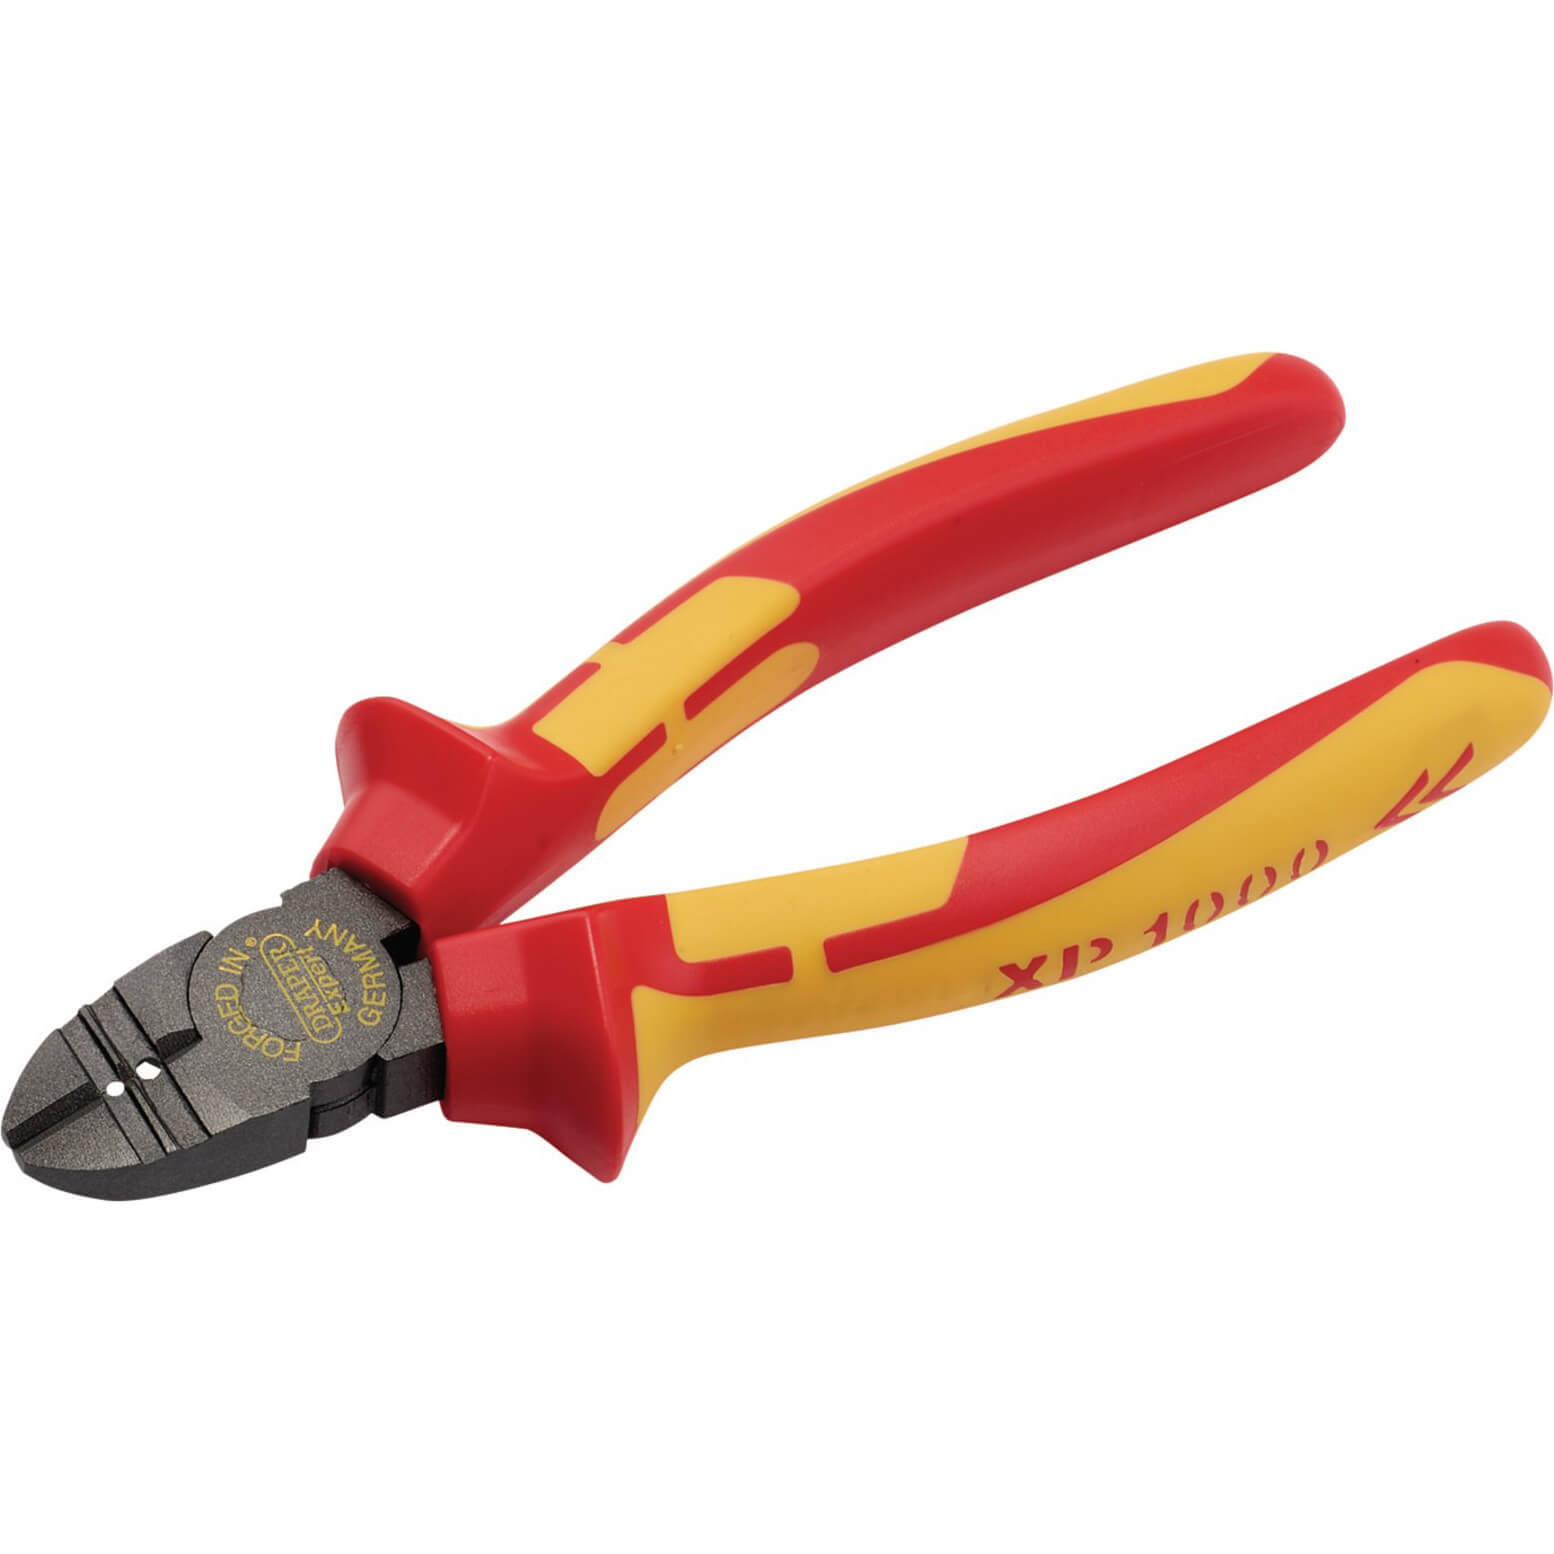 Image of Draper XP1000 VDE Insulated Side Cutter Wire Stripper 160mm